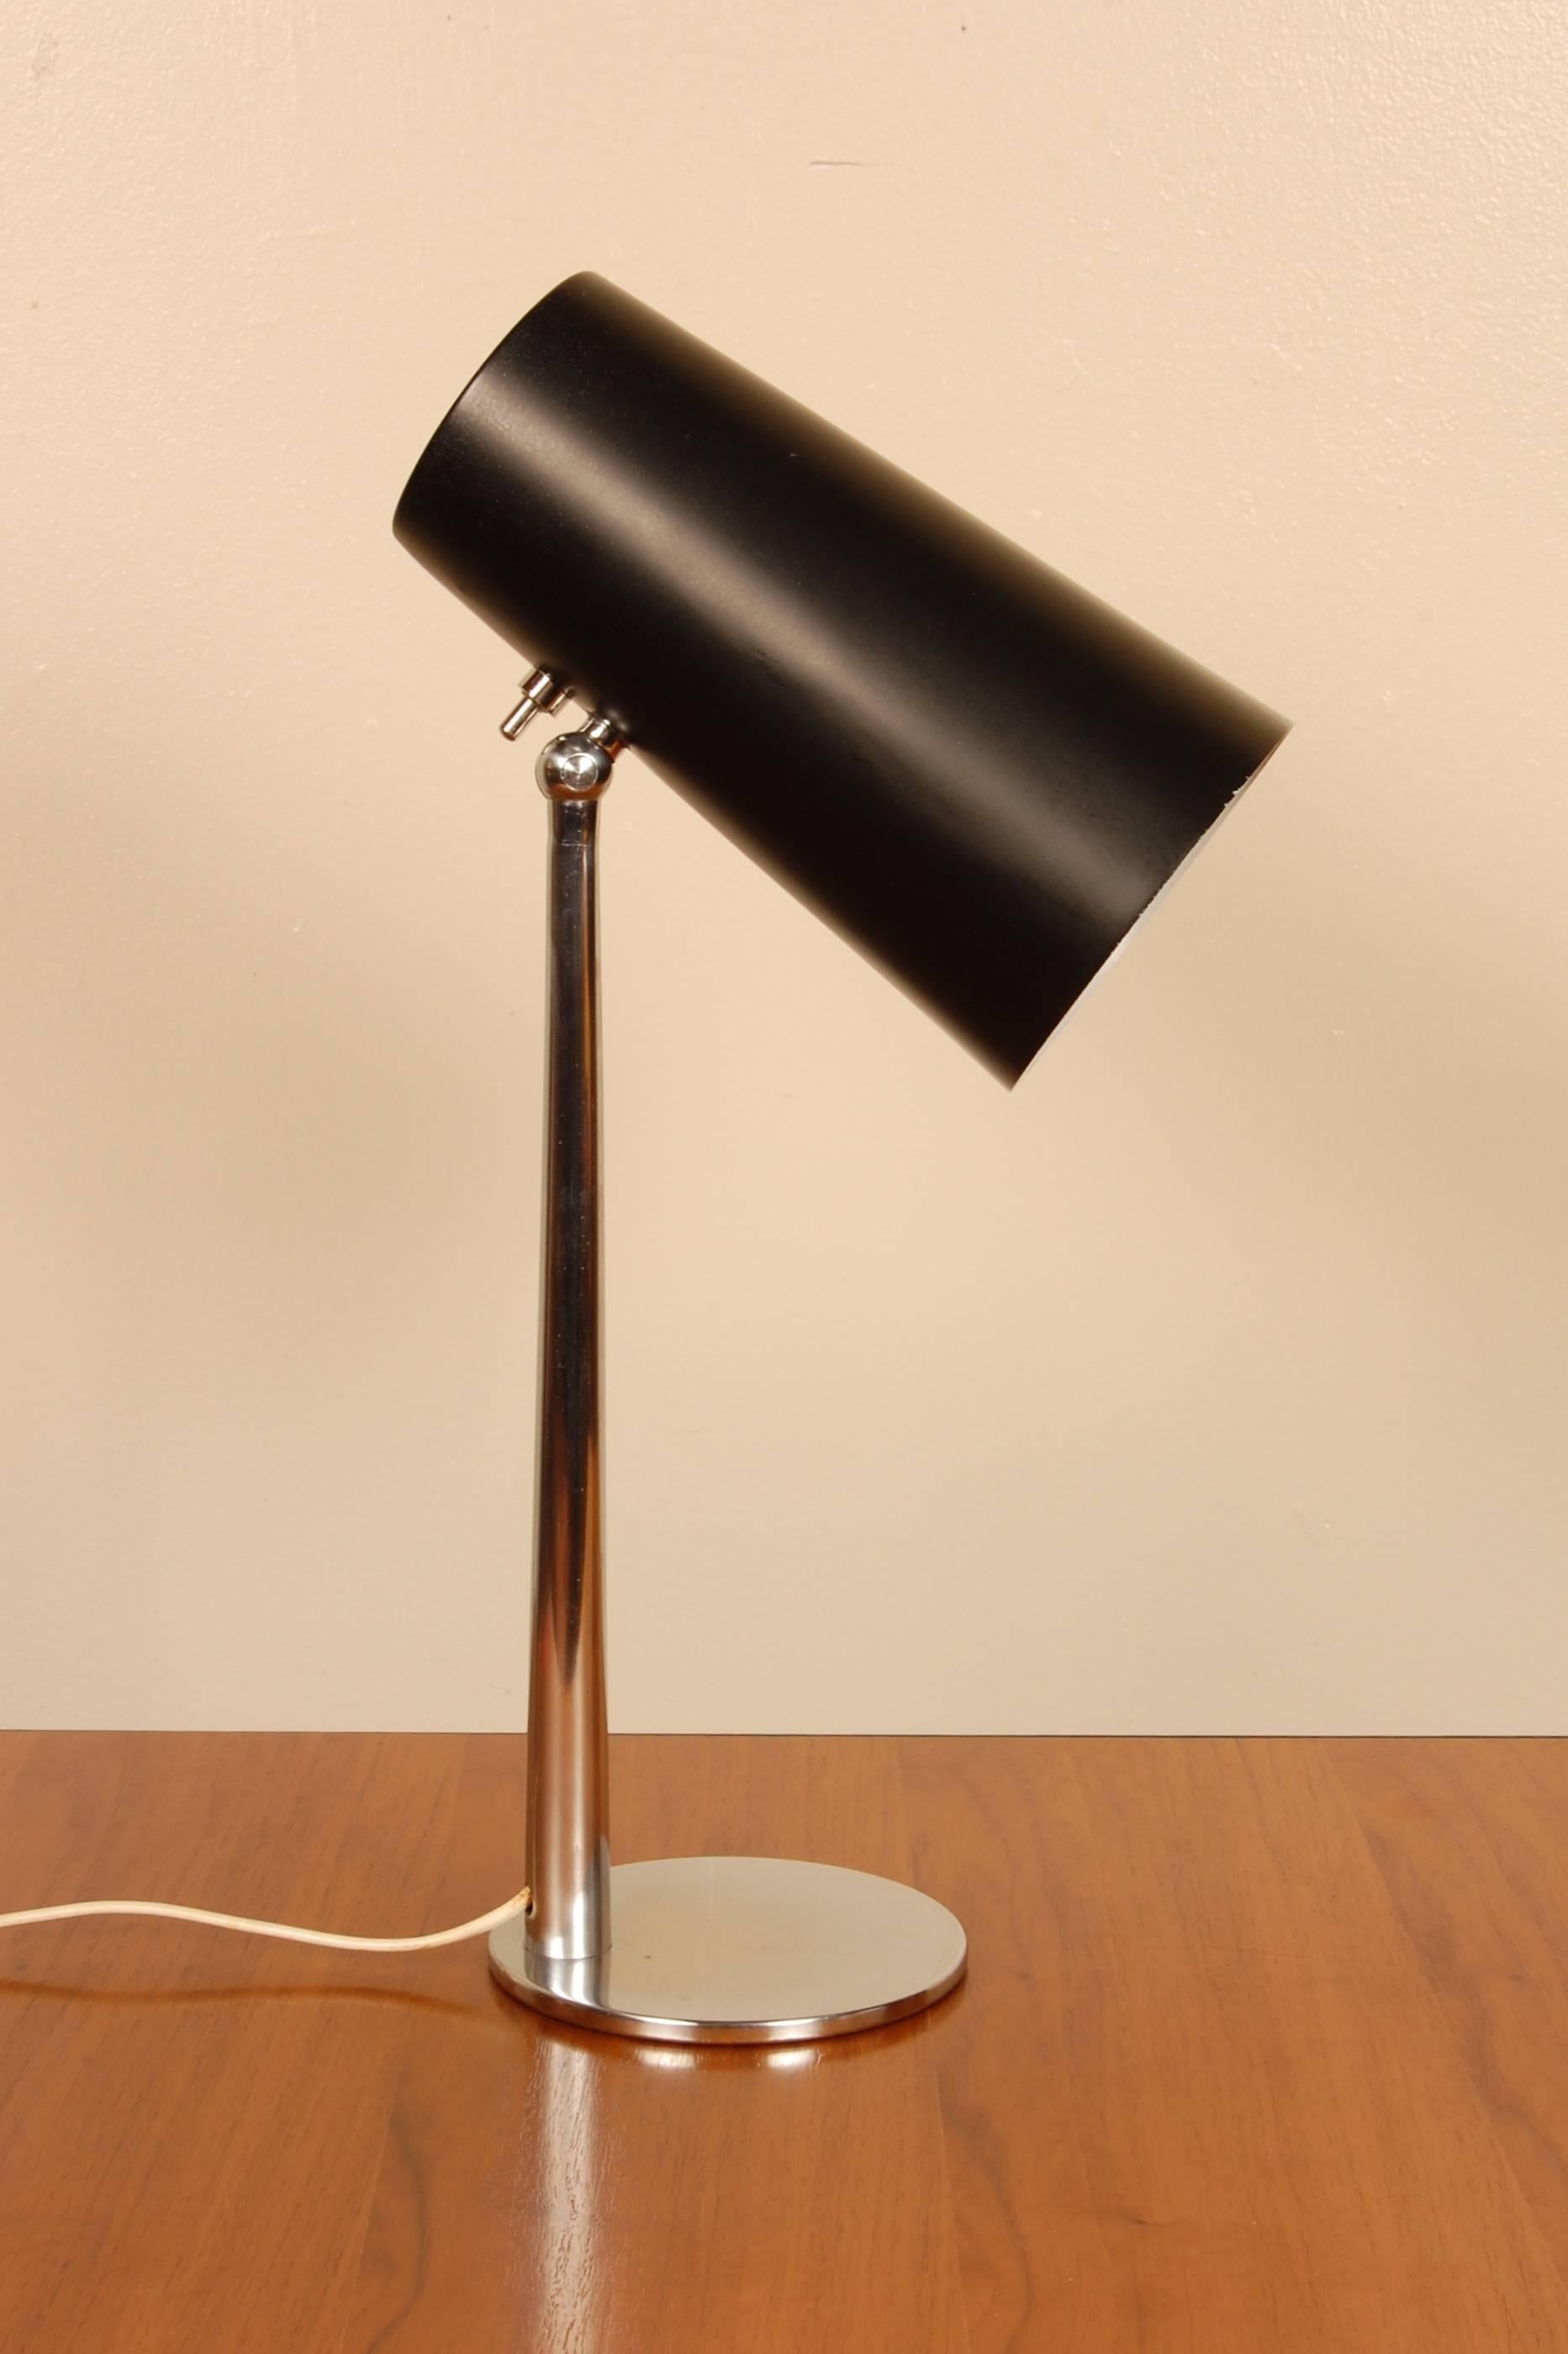 Italian table lamp with a conical black lacquered aluminum shade on a chromed base that allows for the adjustment of the light direction.